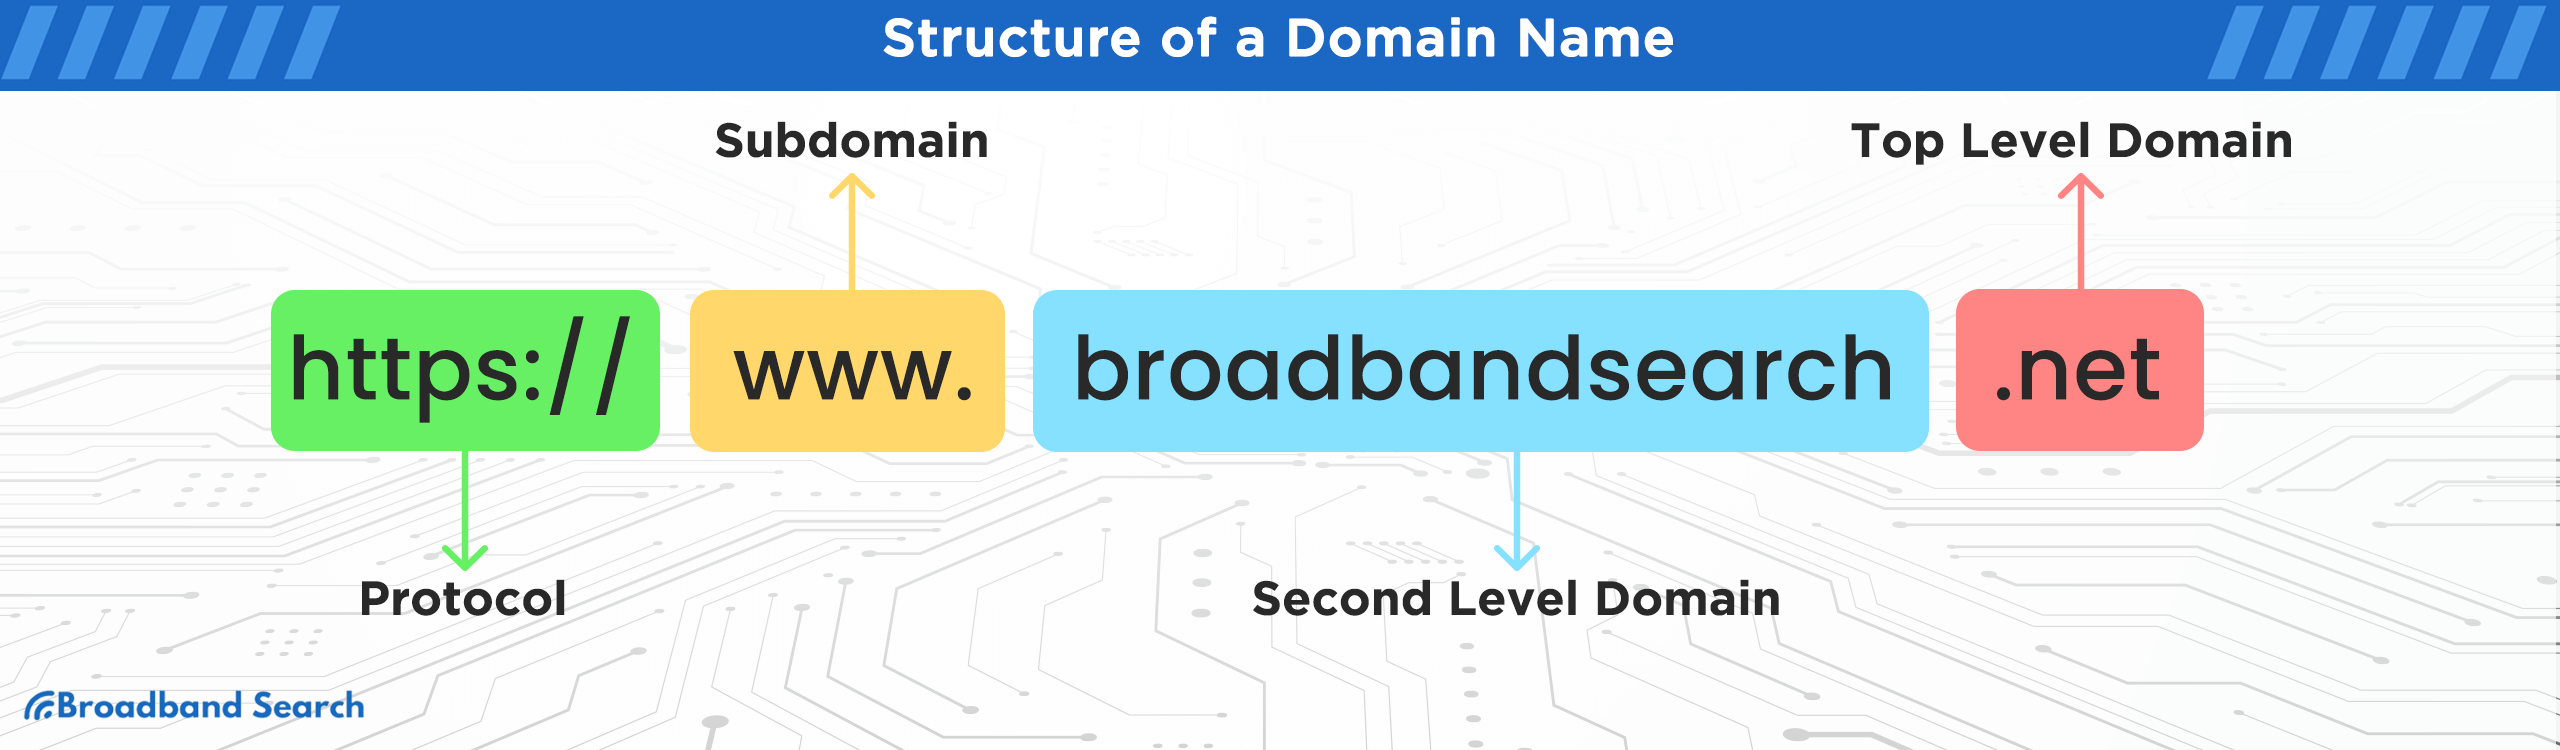 Structure of a Domain name